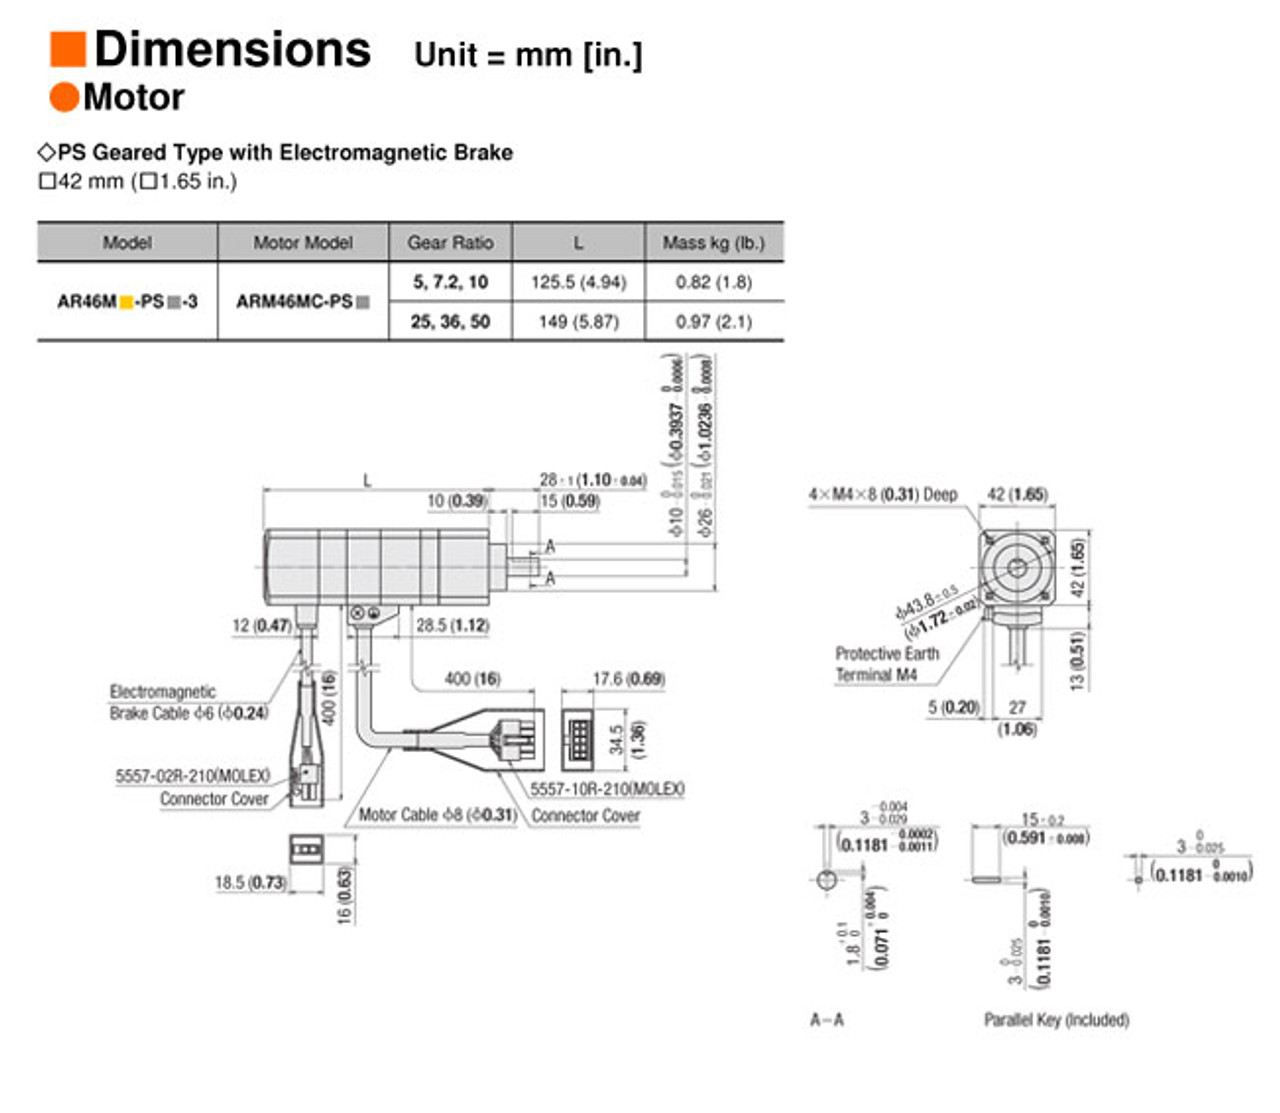 AR46MAD-PS7-3 - Dimensions